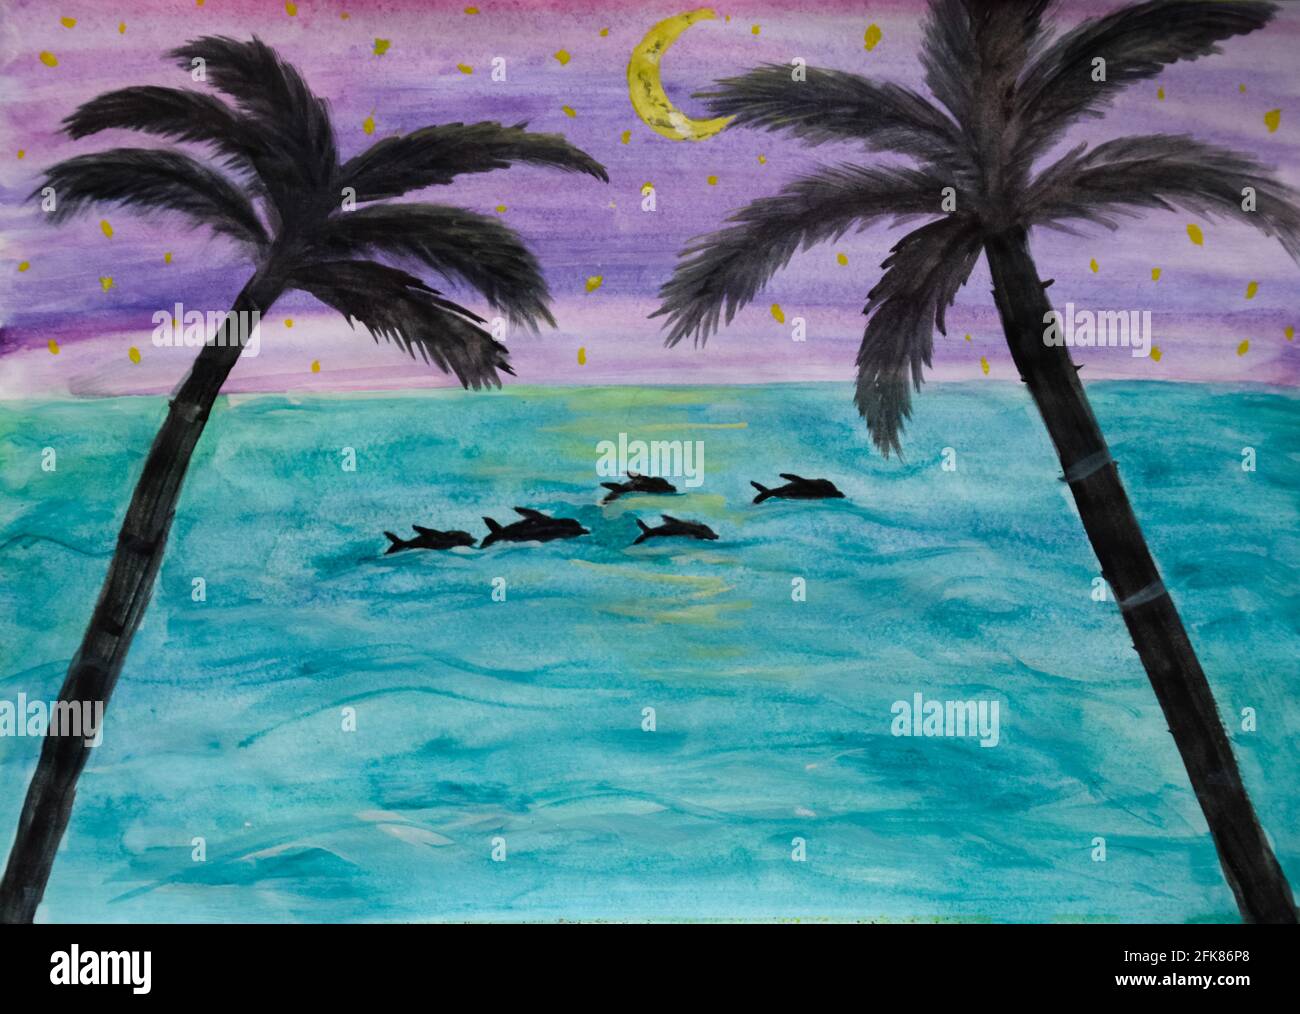 Palms by the sea, at night dolphins swim in the sea. The moon is in the sky. Stock Photo